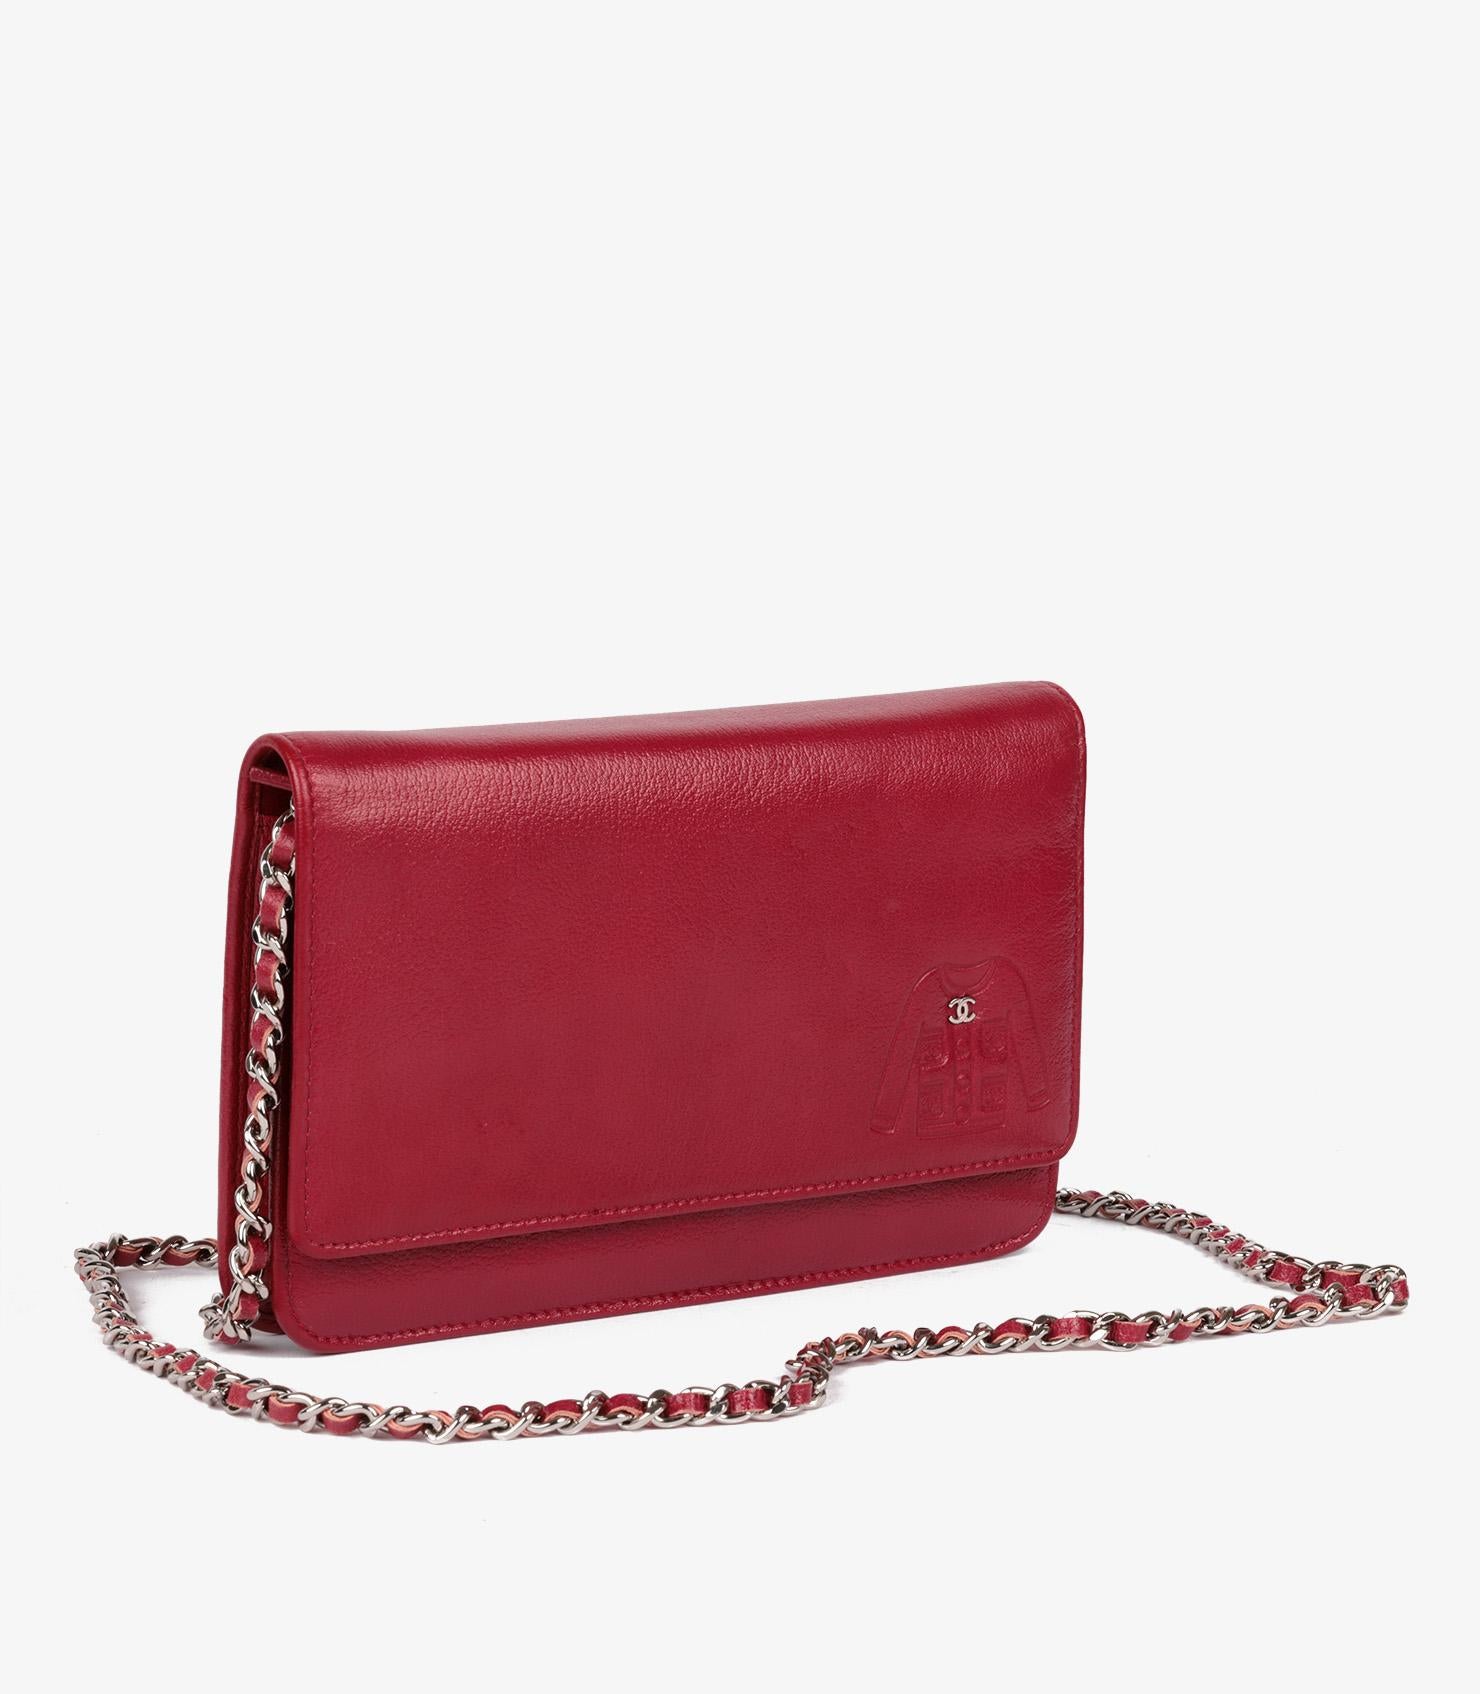 Chanel Red Goatskin Leather Mademoiselle Jacket Embossed Wallet-On-Chain WOC In Excellent Condition For Sale In Bishop's Stortford, Hertfordshire